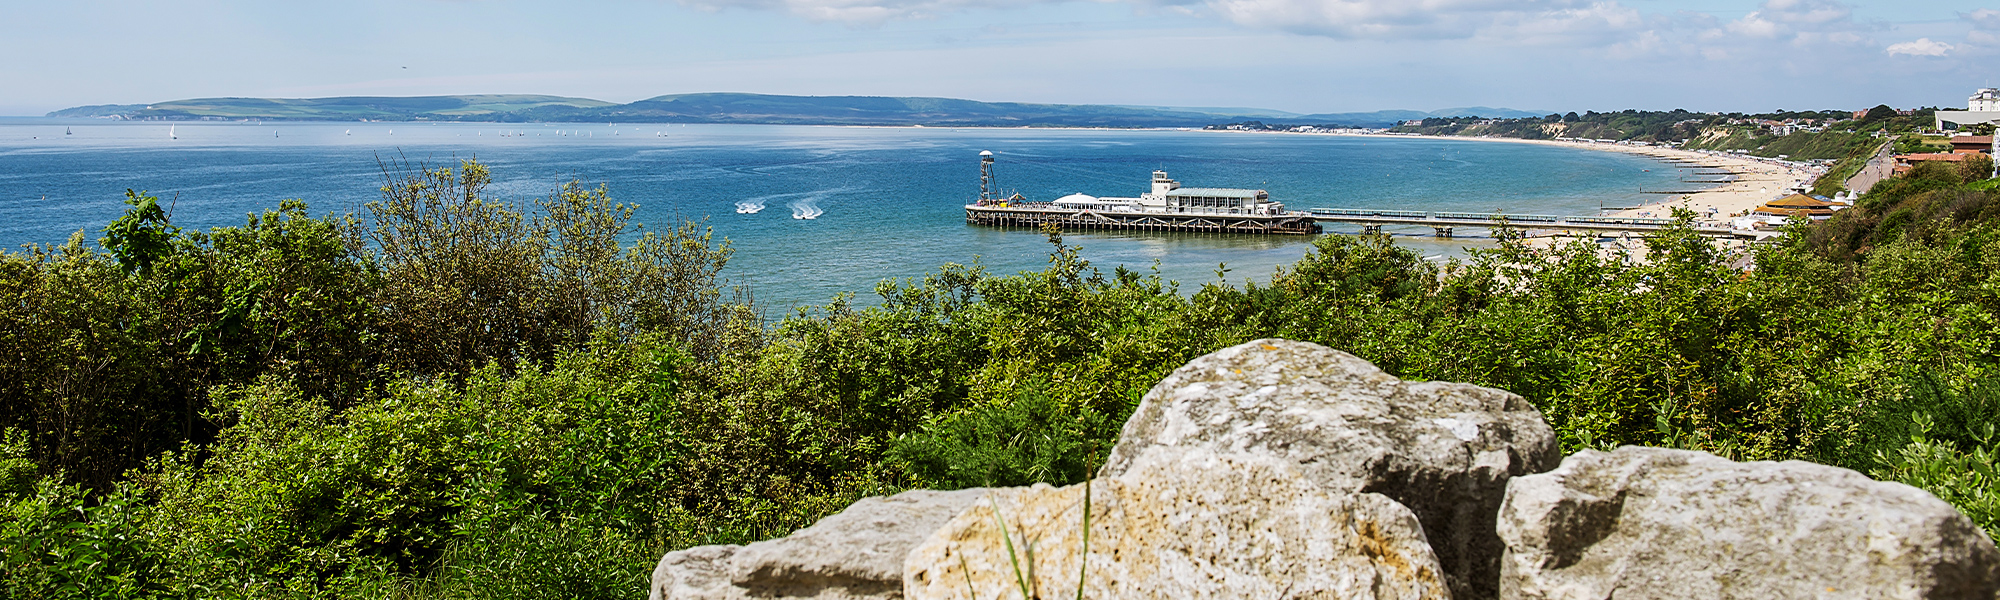 tourhub | Just Go Holidays | Bournemouth & the Isle of Wight by Hovercraft 